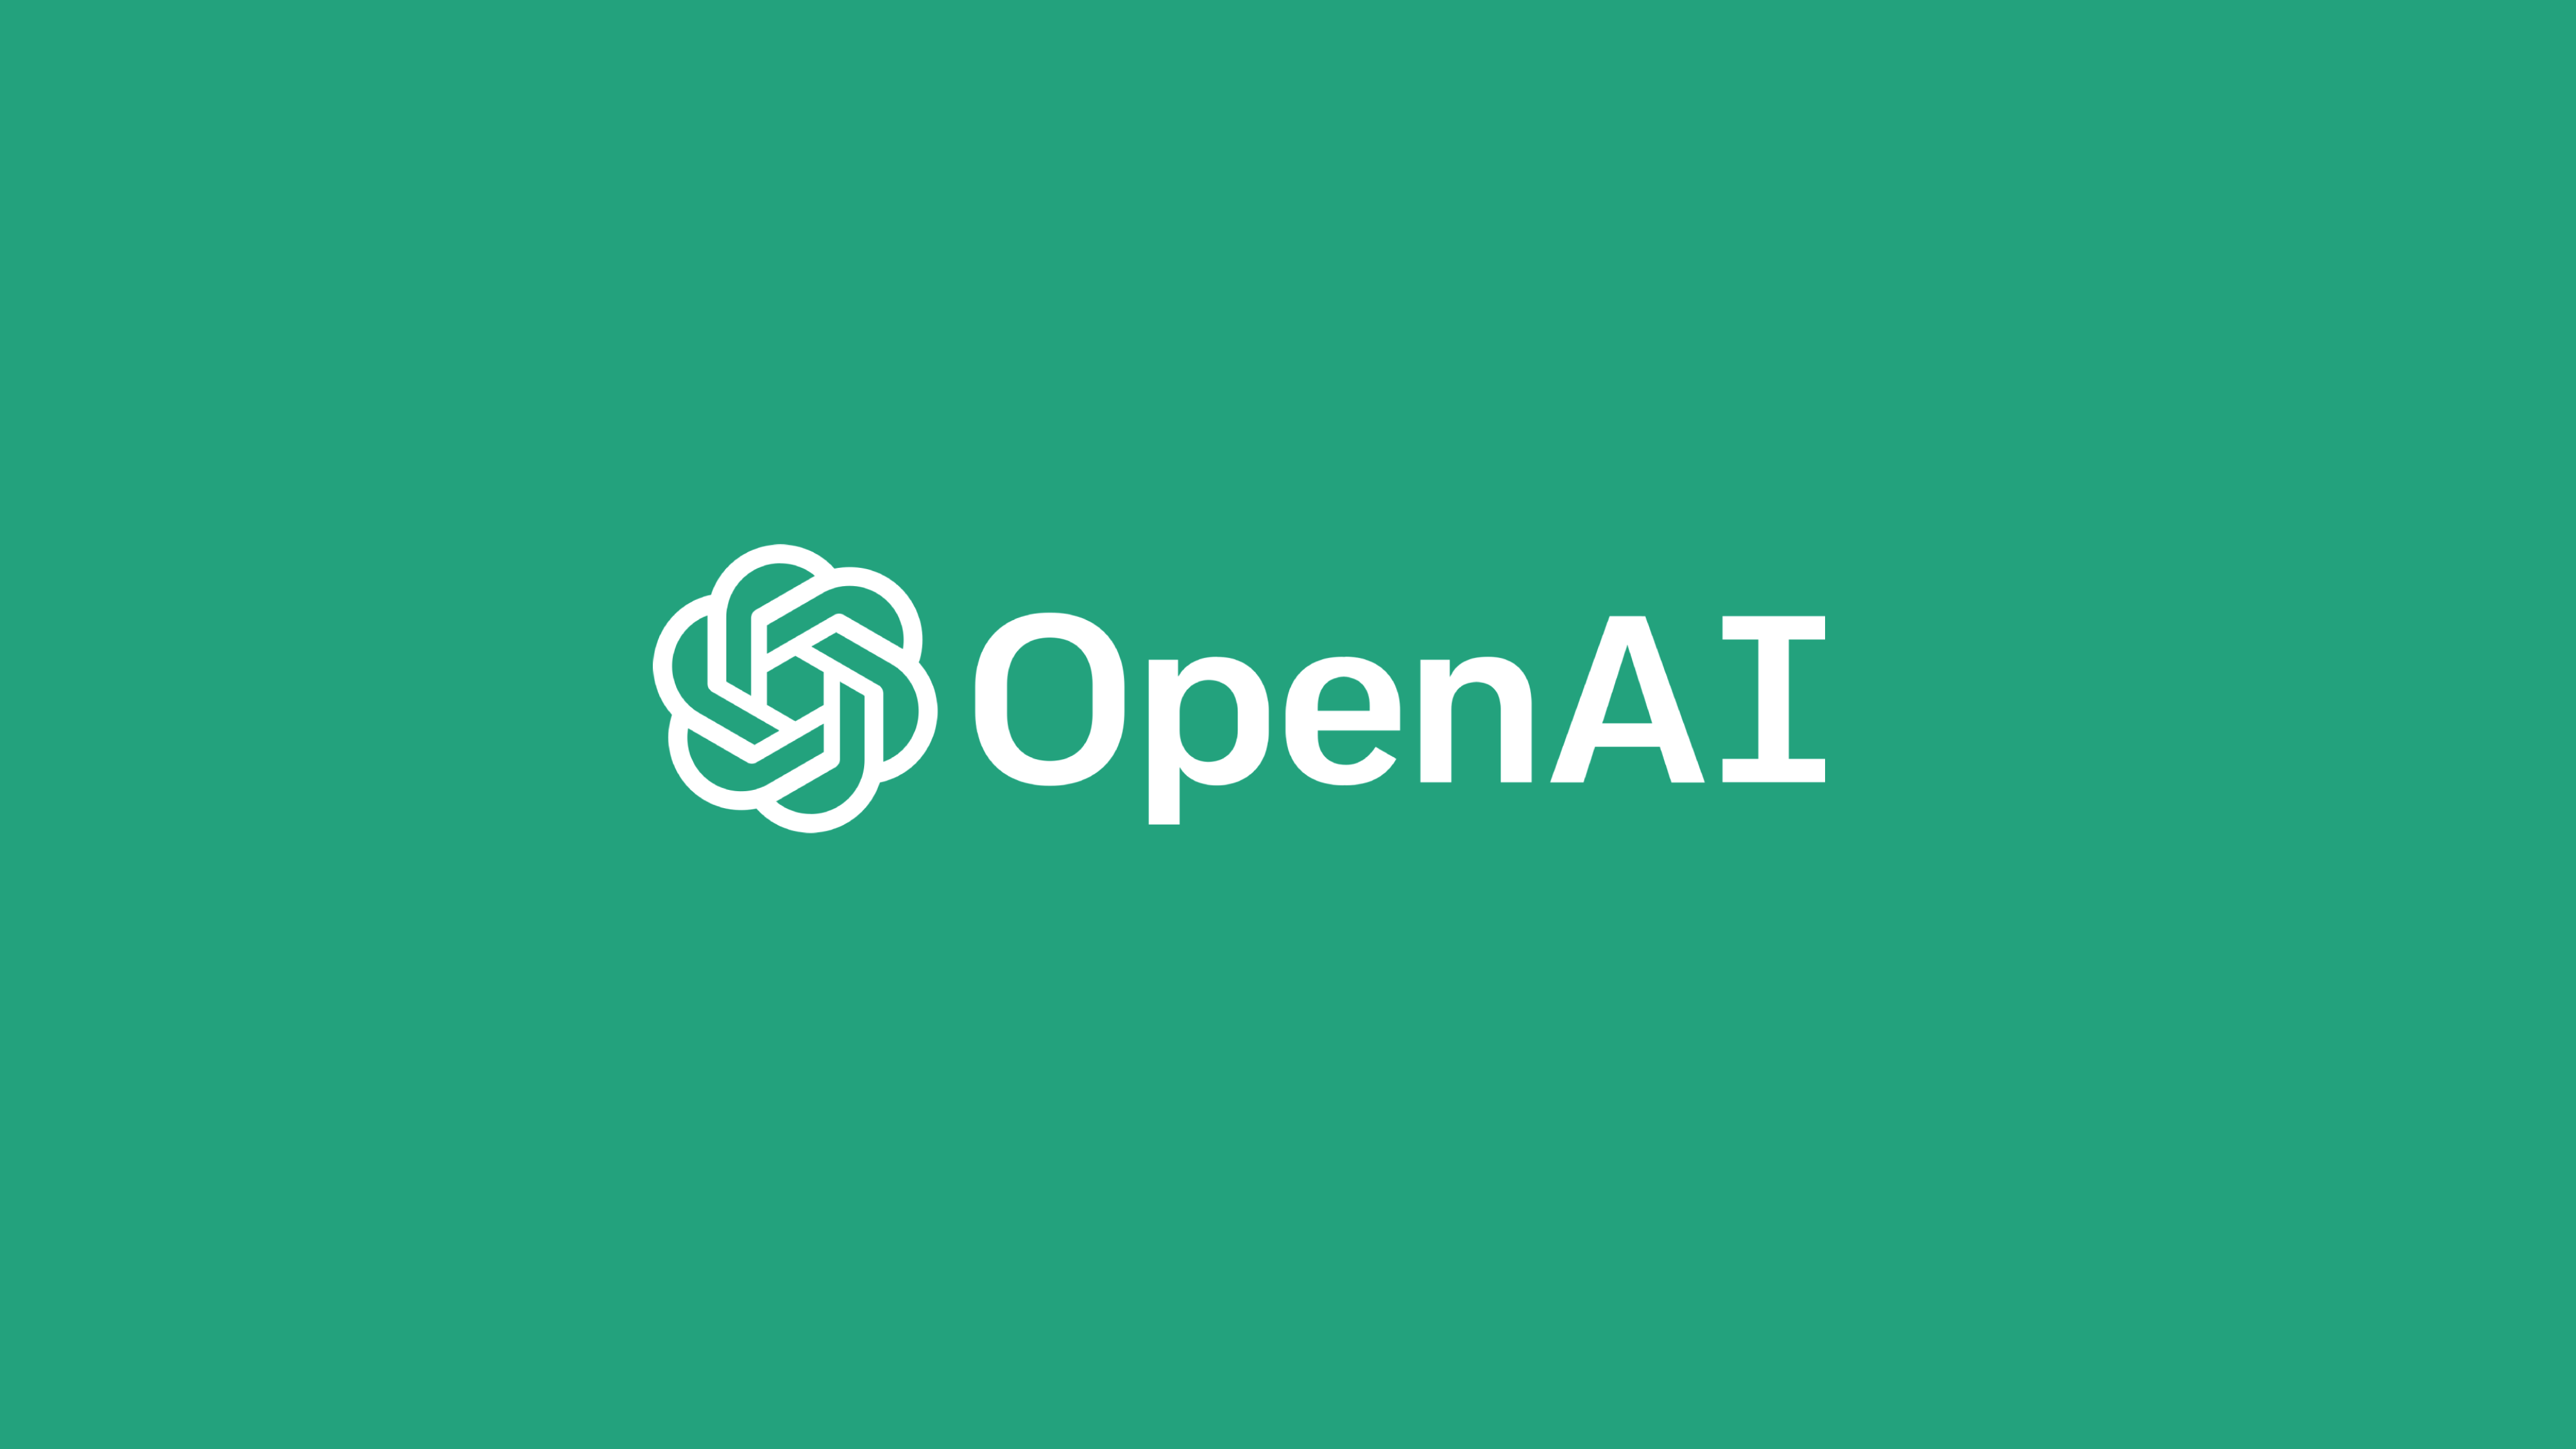 How OpenAI is structured